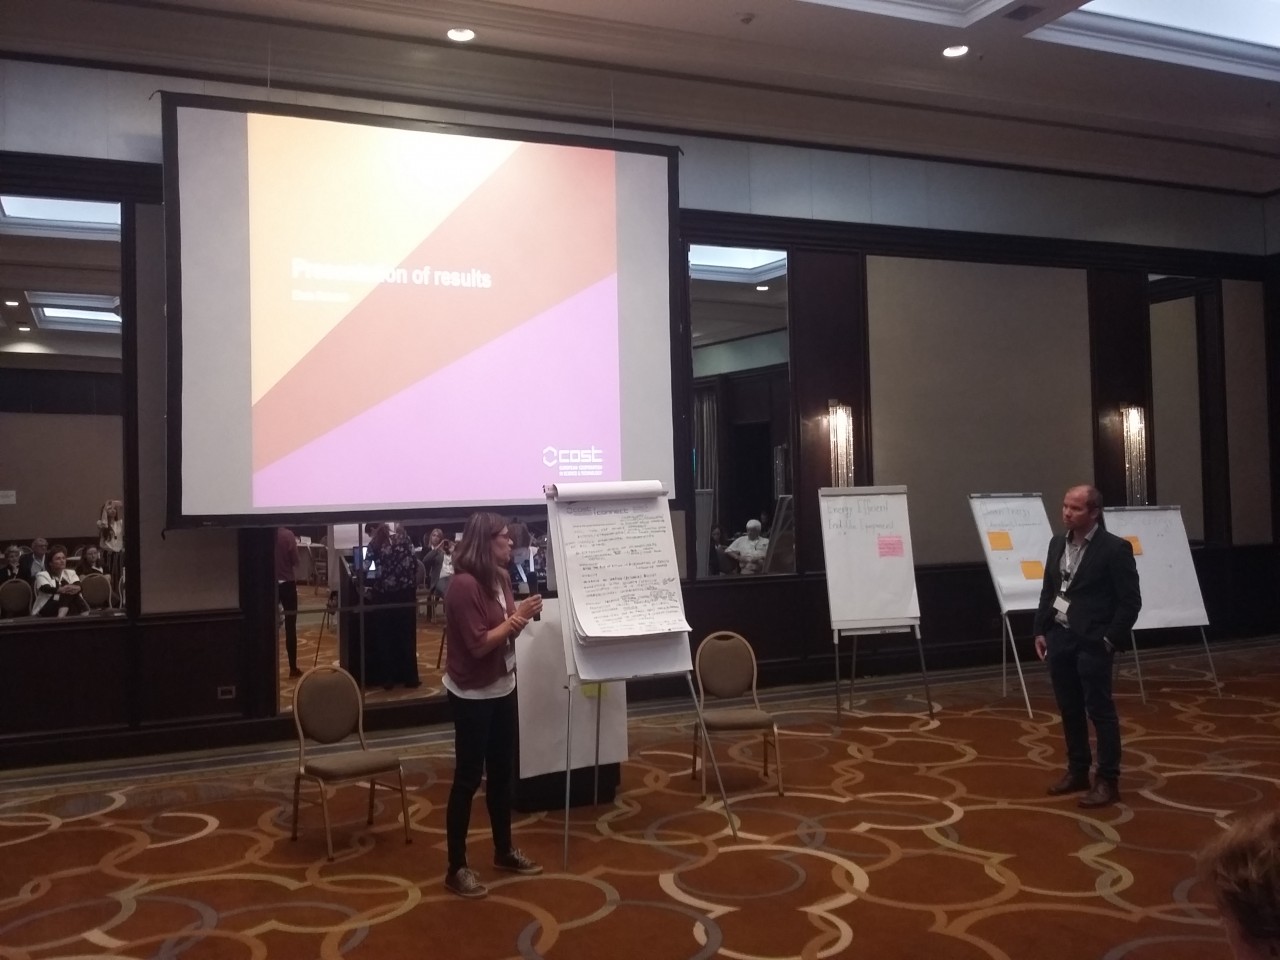 COST CONNECT WORKSHOP – SUSTAINABLE ENERGY IN THE DANUBE REGION